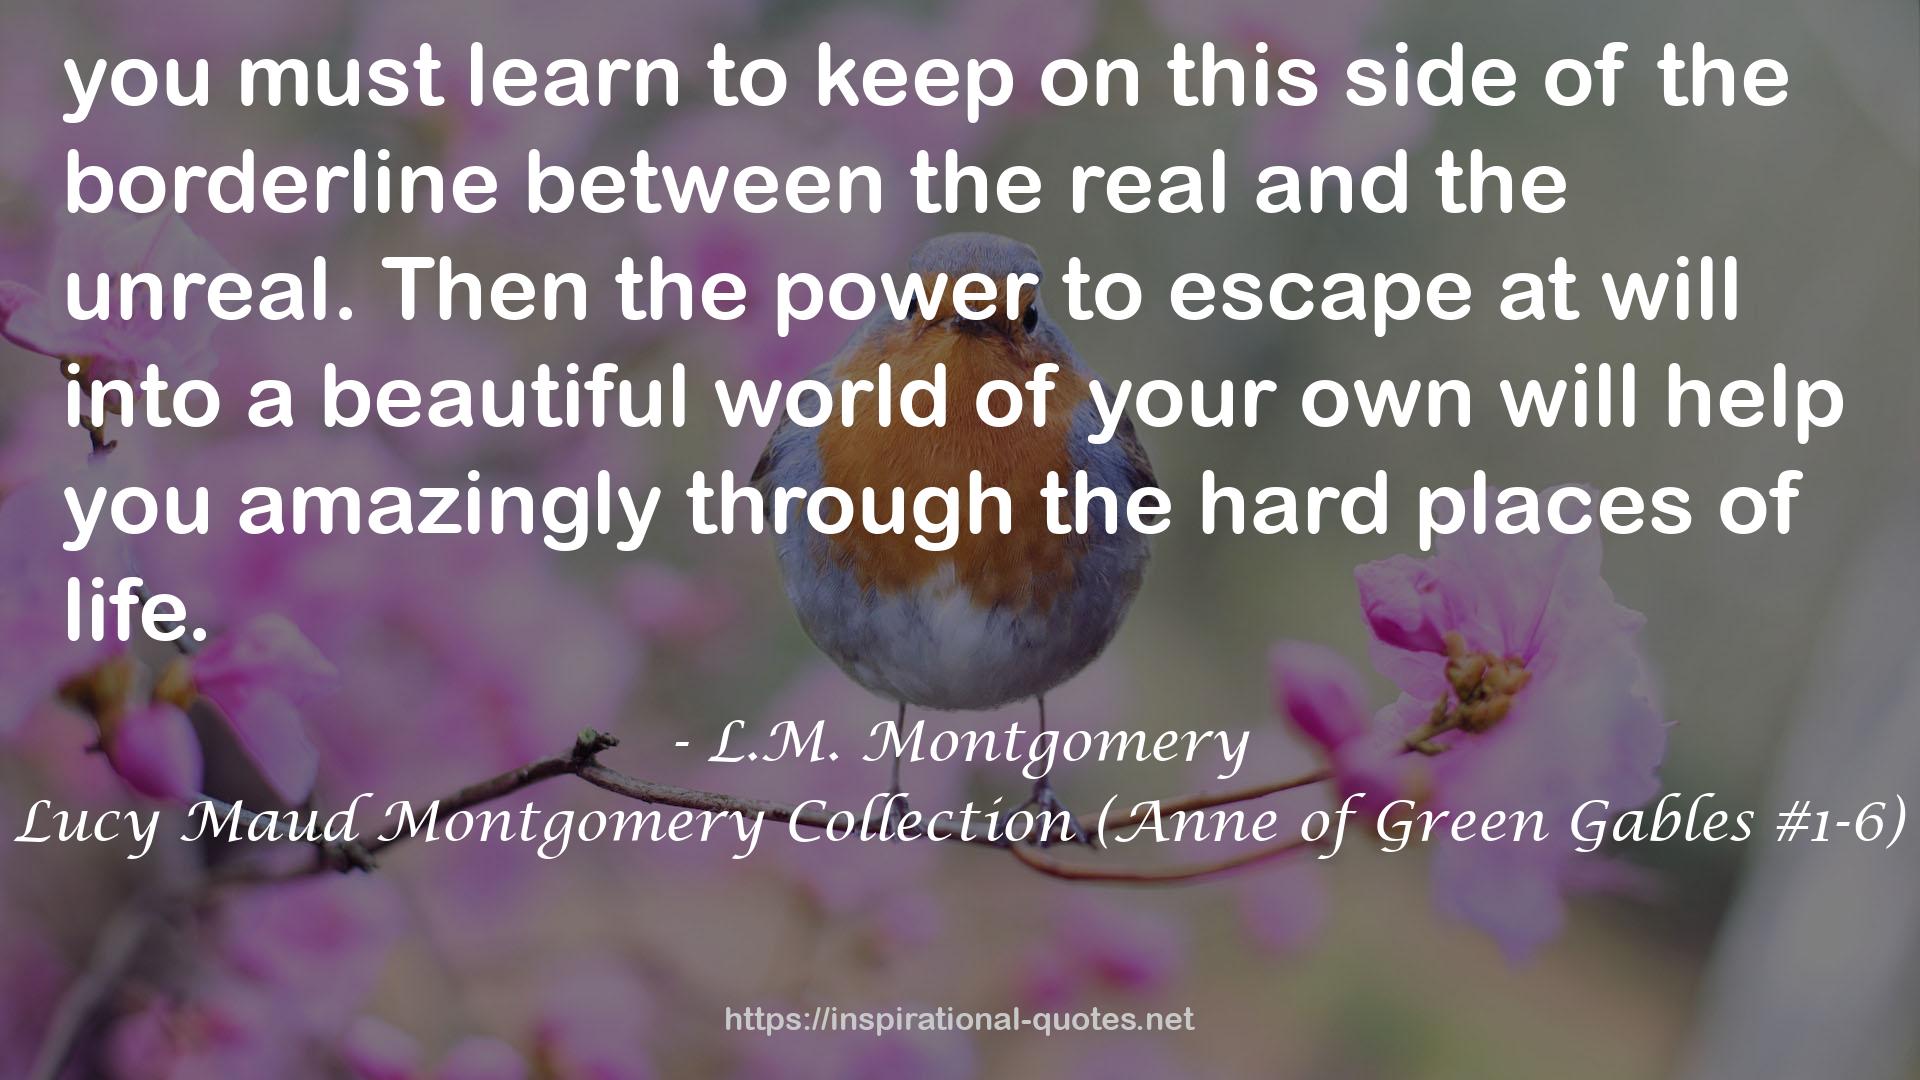 Lucy Maud Montgomery Collection (Anne of Green Gables #1-6) QUOTES